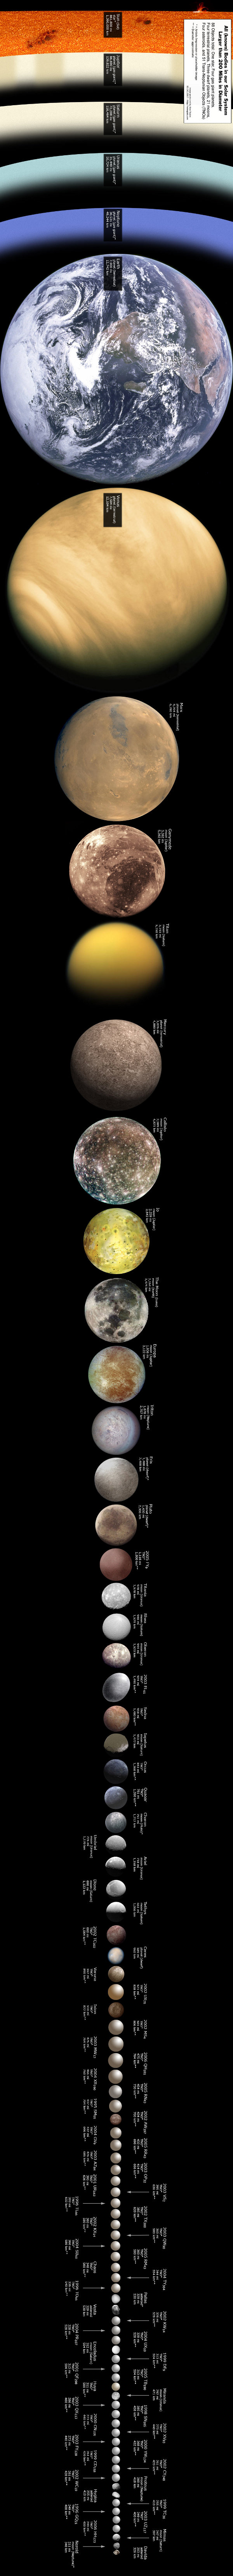 solar-system-by-size